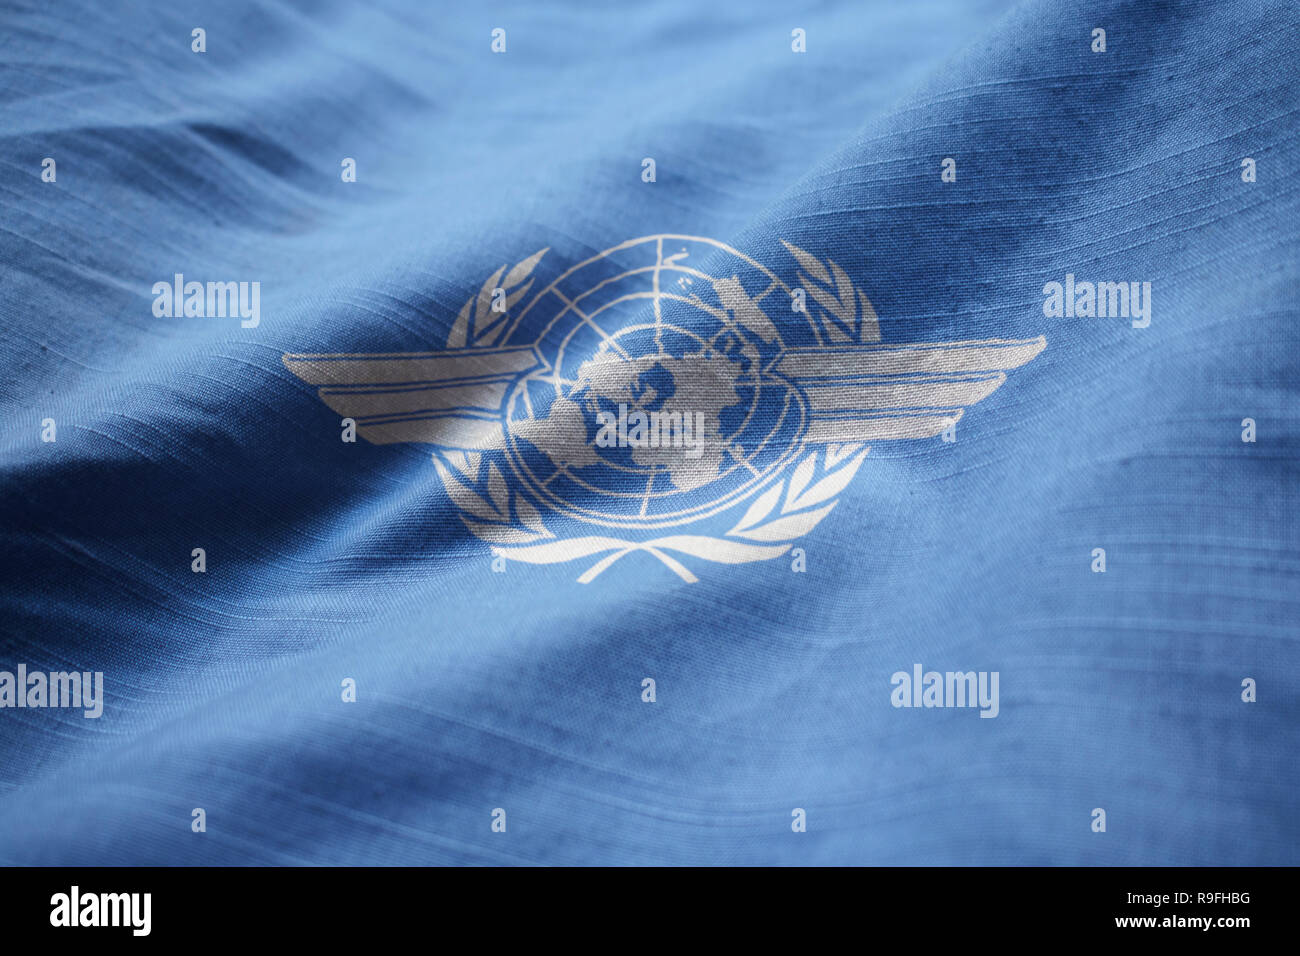 Closeup of Ruffled International Civil Aviation Organization Flag, ICAO Flag Blowing in Wind Stock Photo